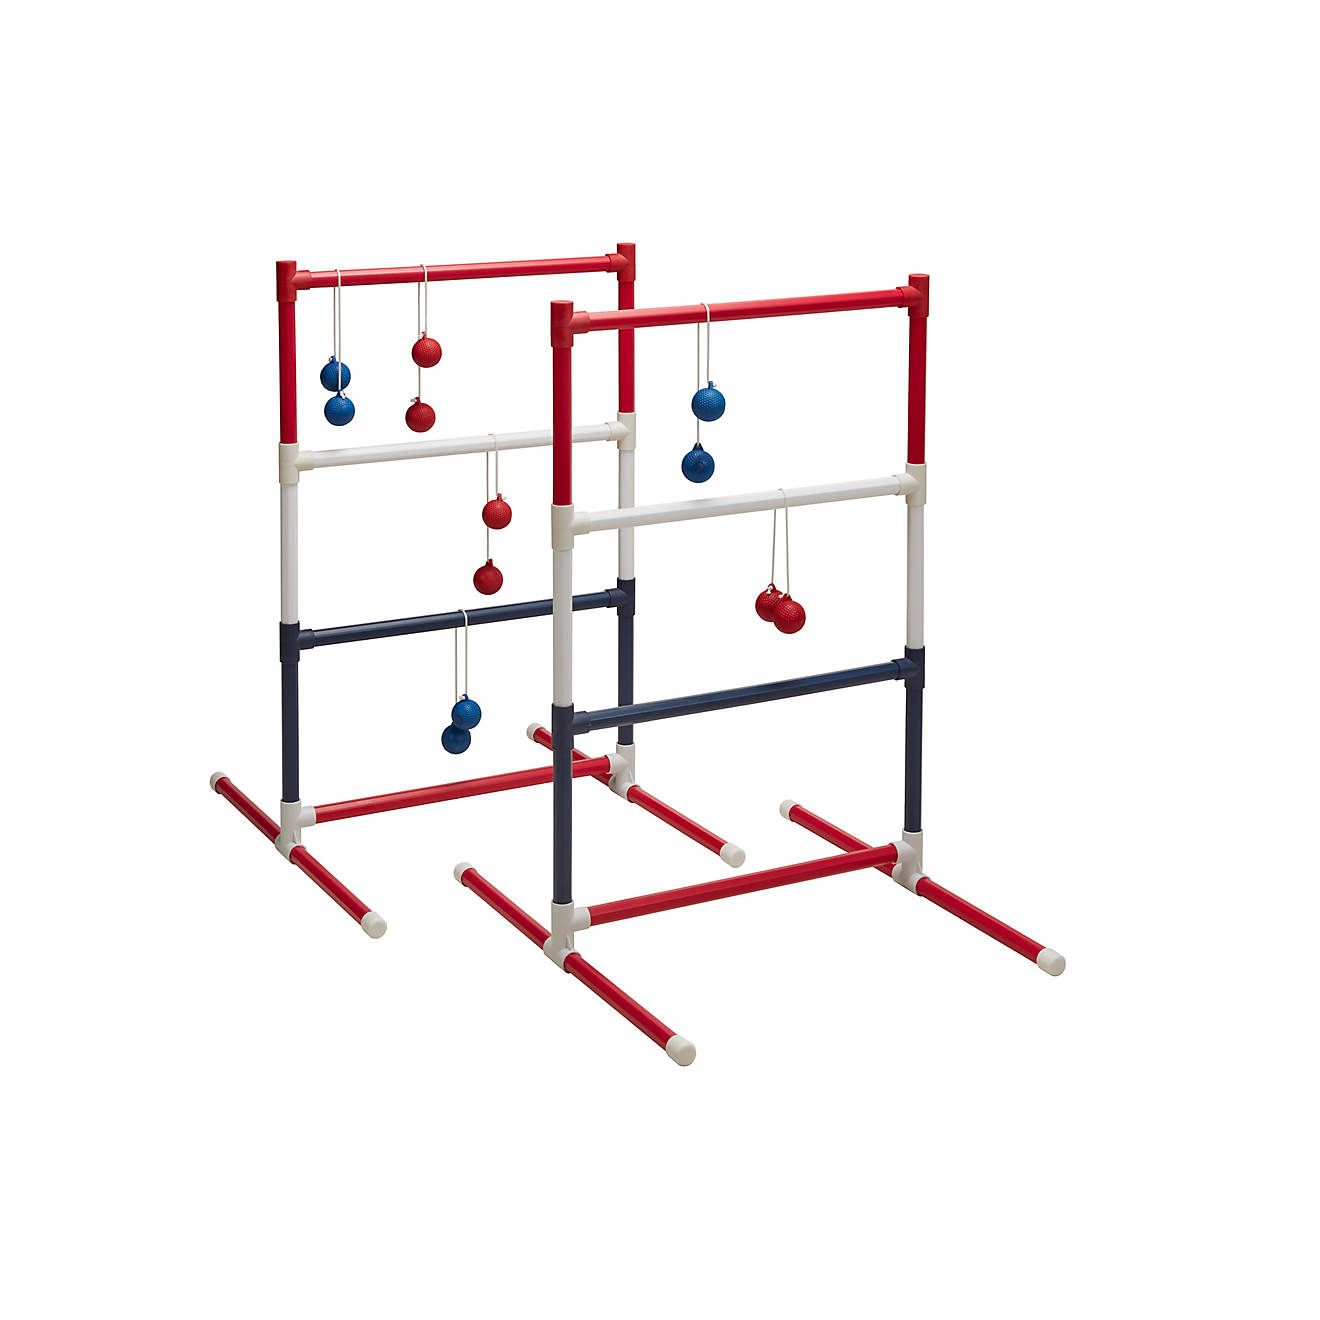 AGame Classic Ladderball Game | Academy | Academy Sports + Outdoors